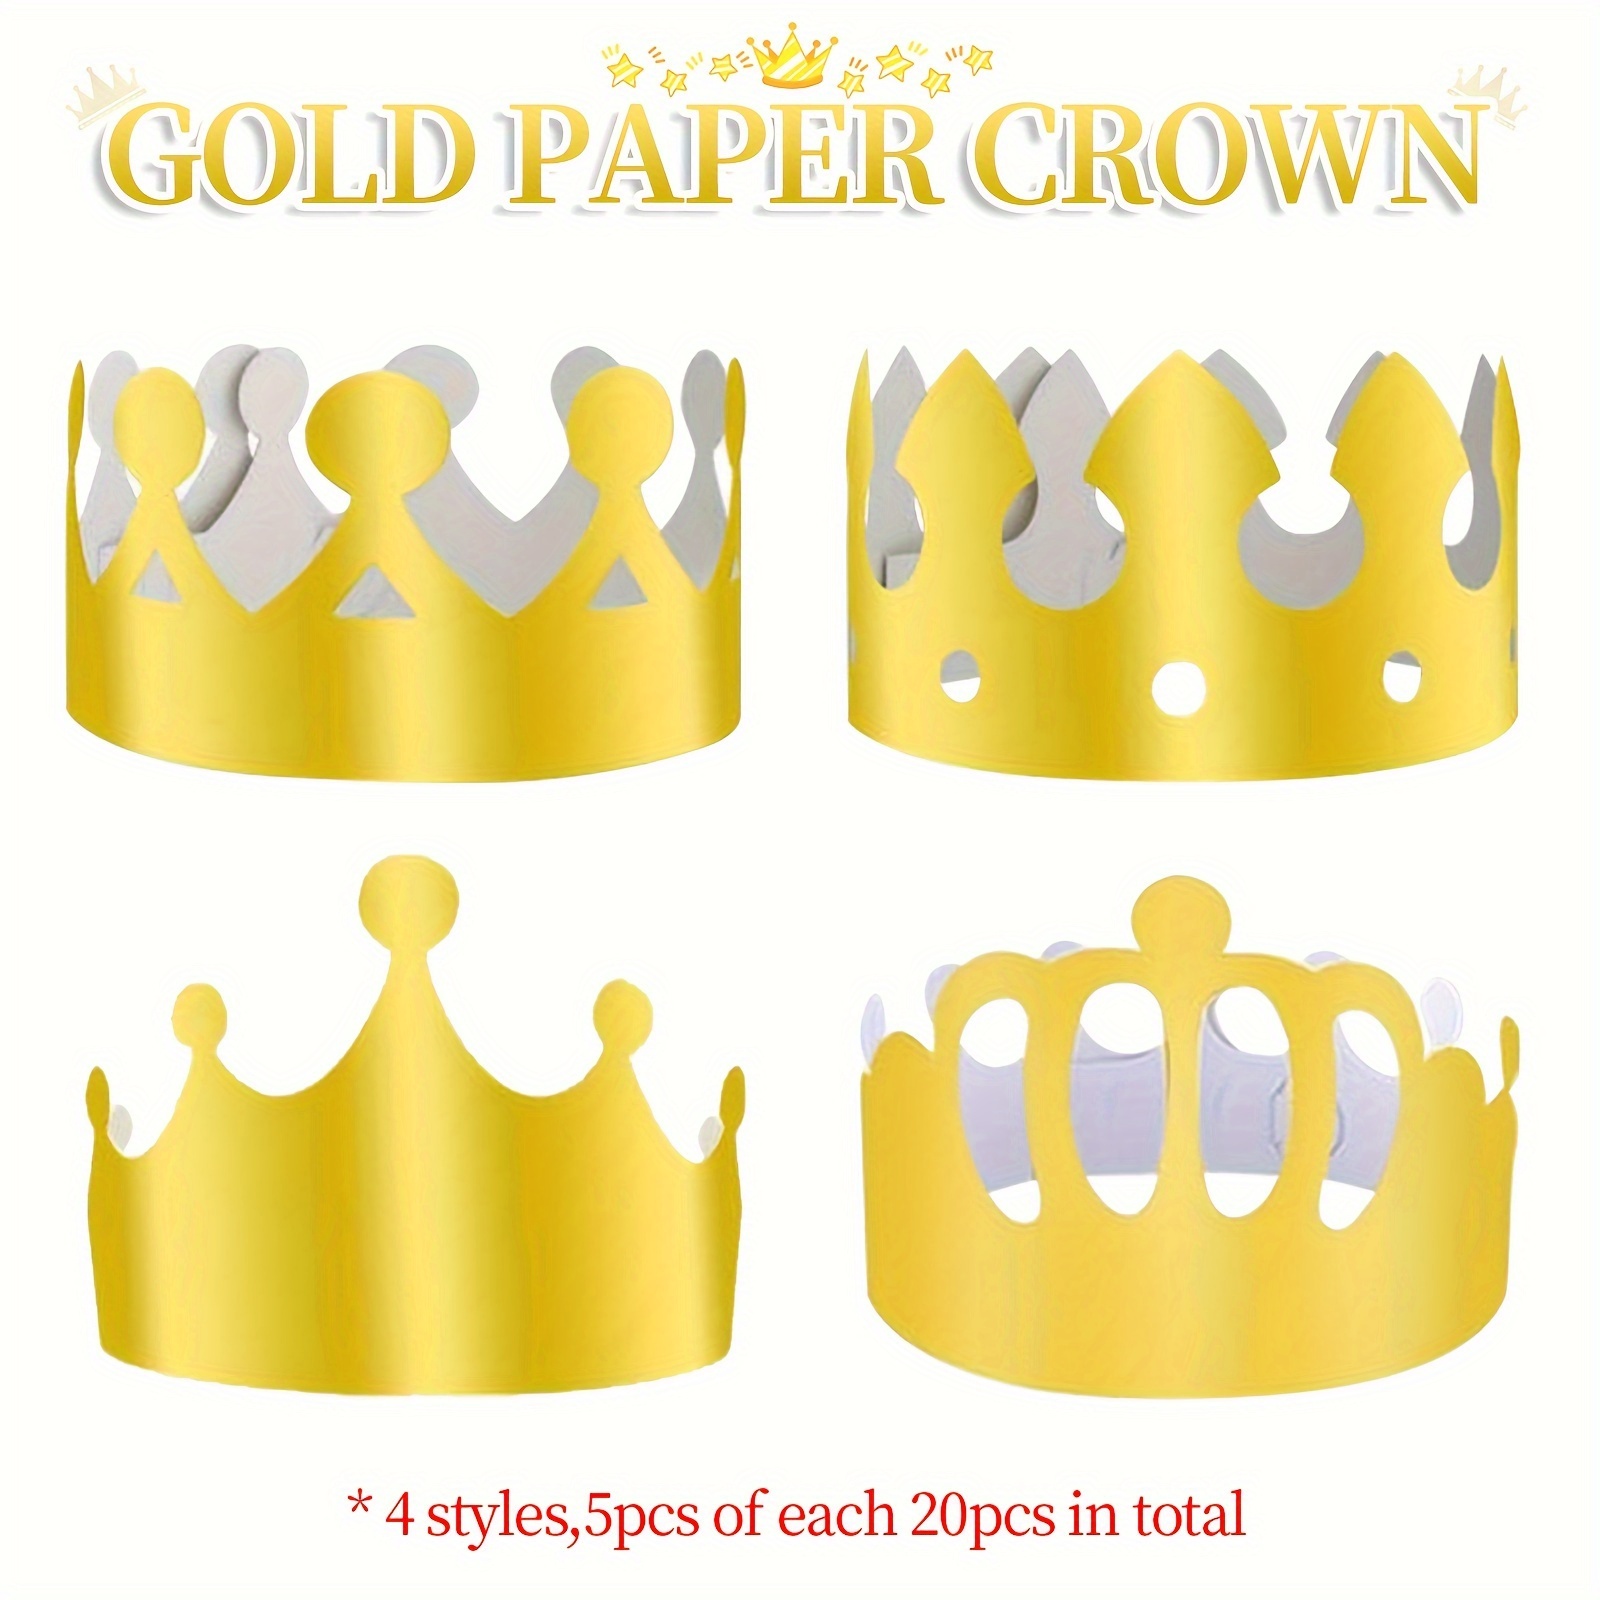 

20pcs, Golden Paper Crown, Golden King Crown Cardboard Diy Party Golden Foil Crown Hat For Boys And Girls Princess Birthday Party